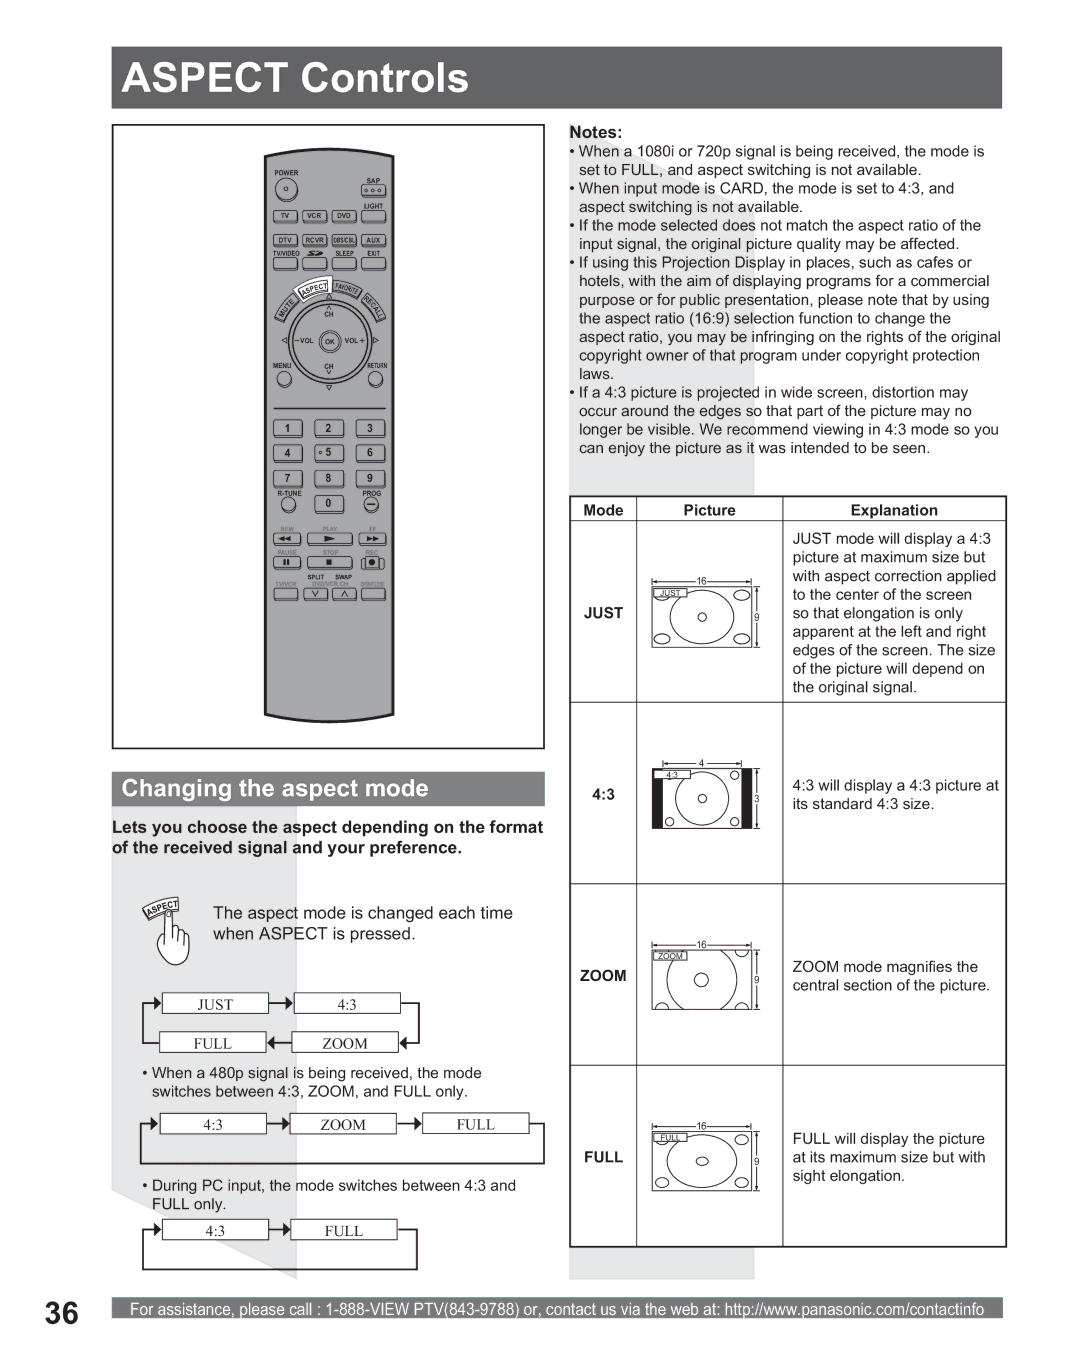 Panasonic PT 56DLX75 Aspect Controls, Changing the aspect mode, Aspect mode is changed each time when Aspect is pressed 